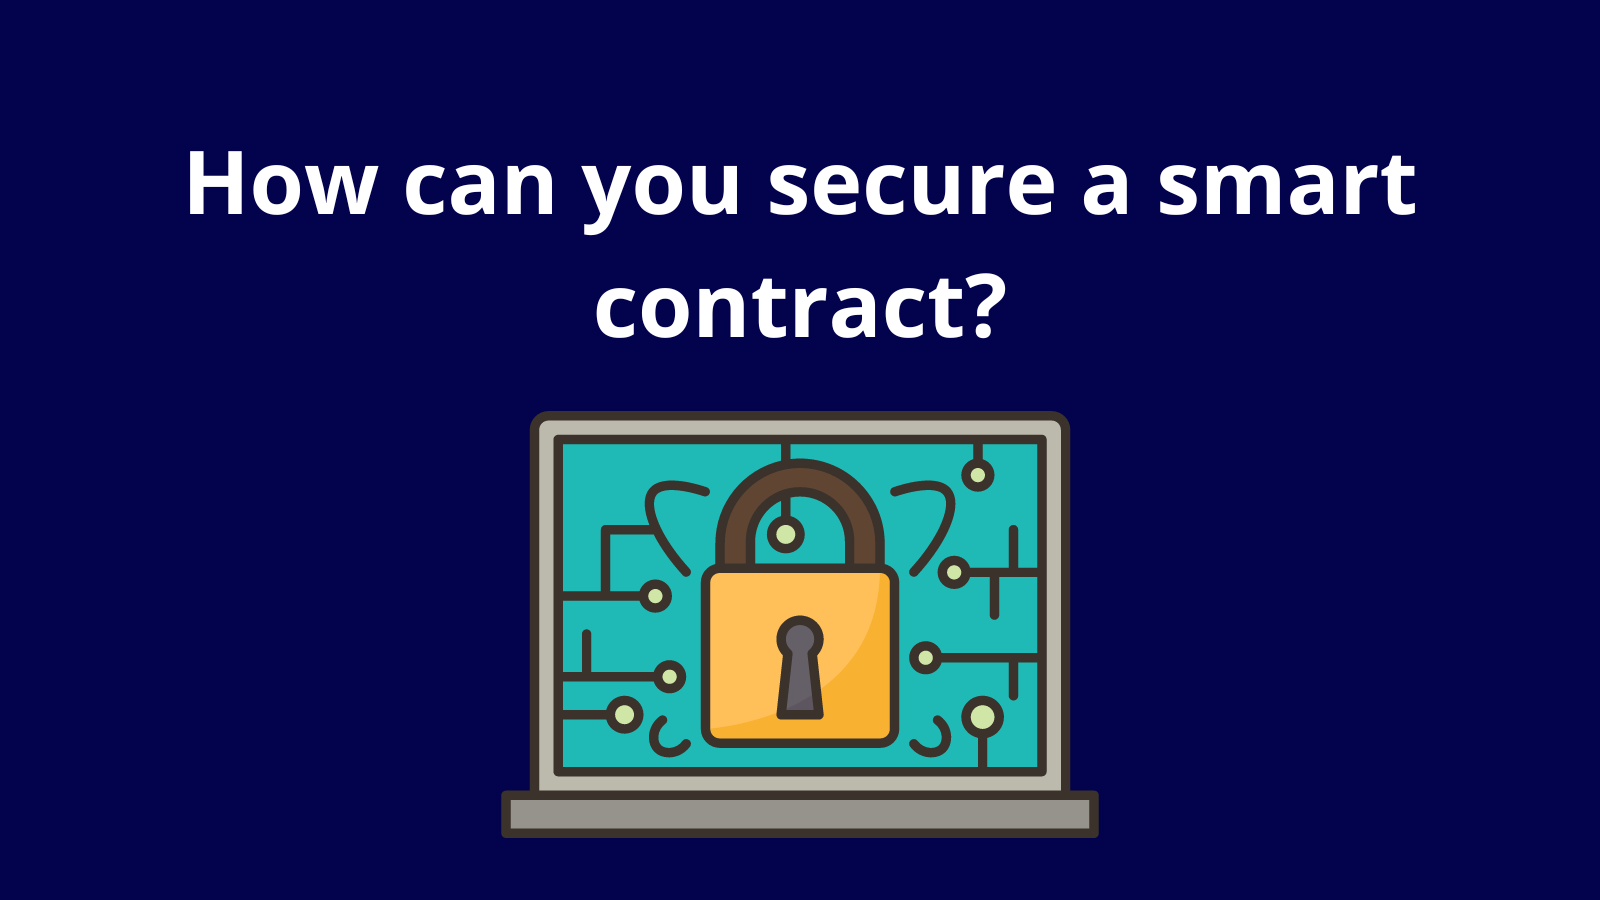 How can you secure a smart contract?